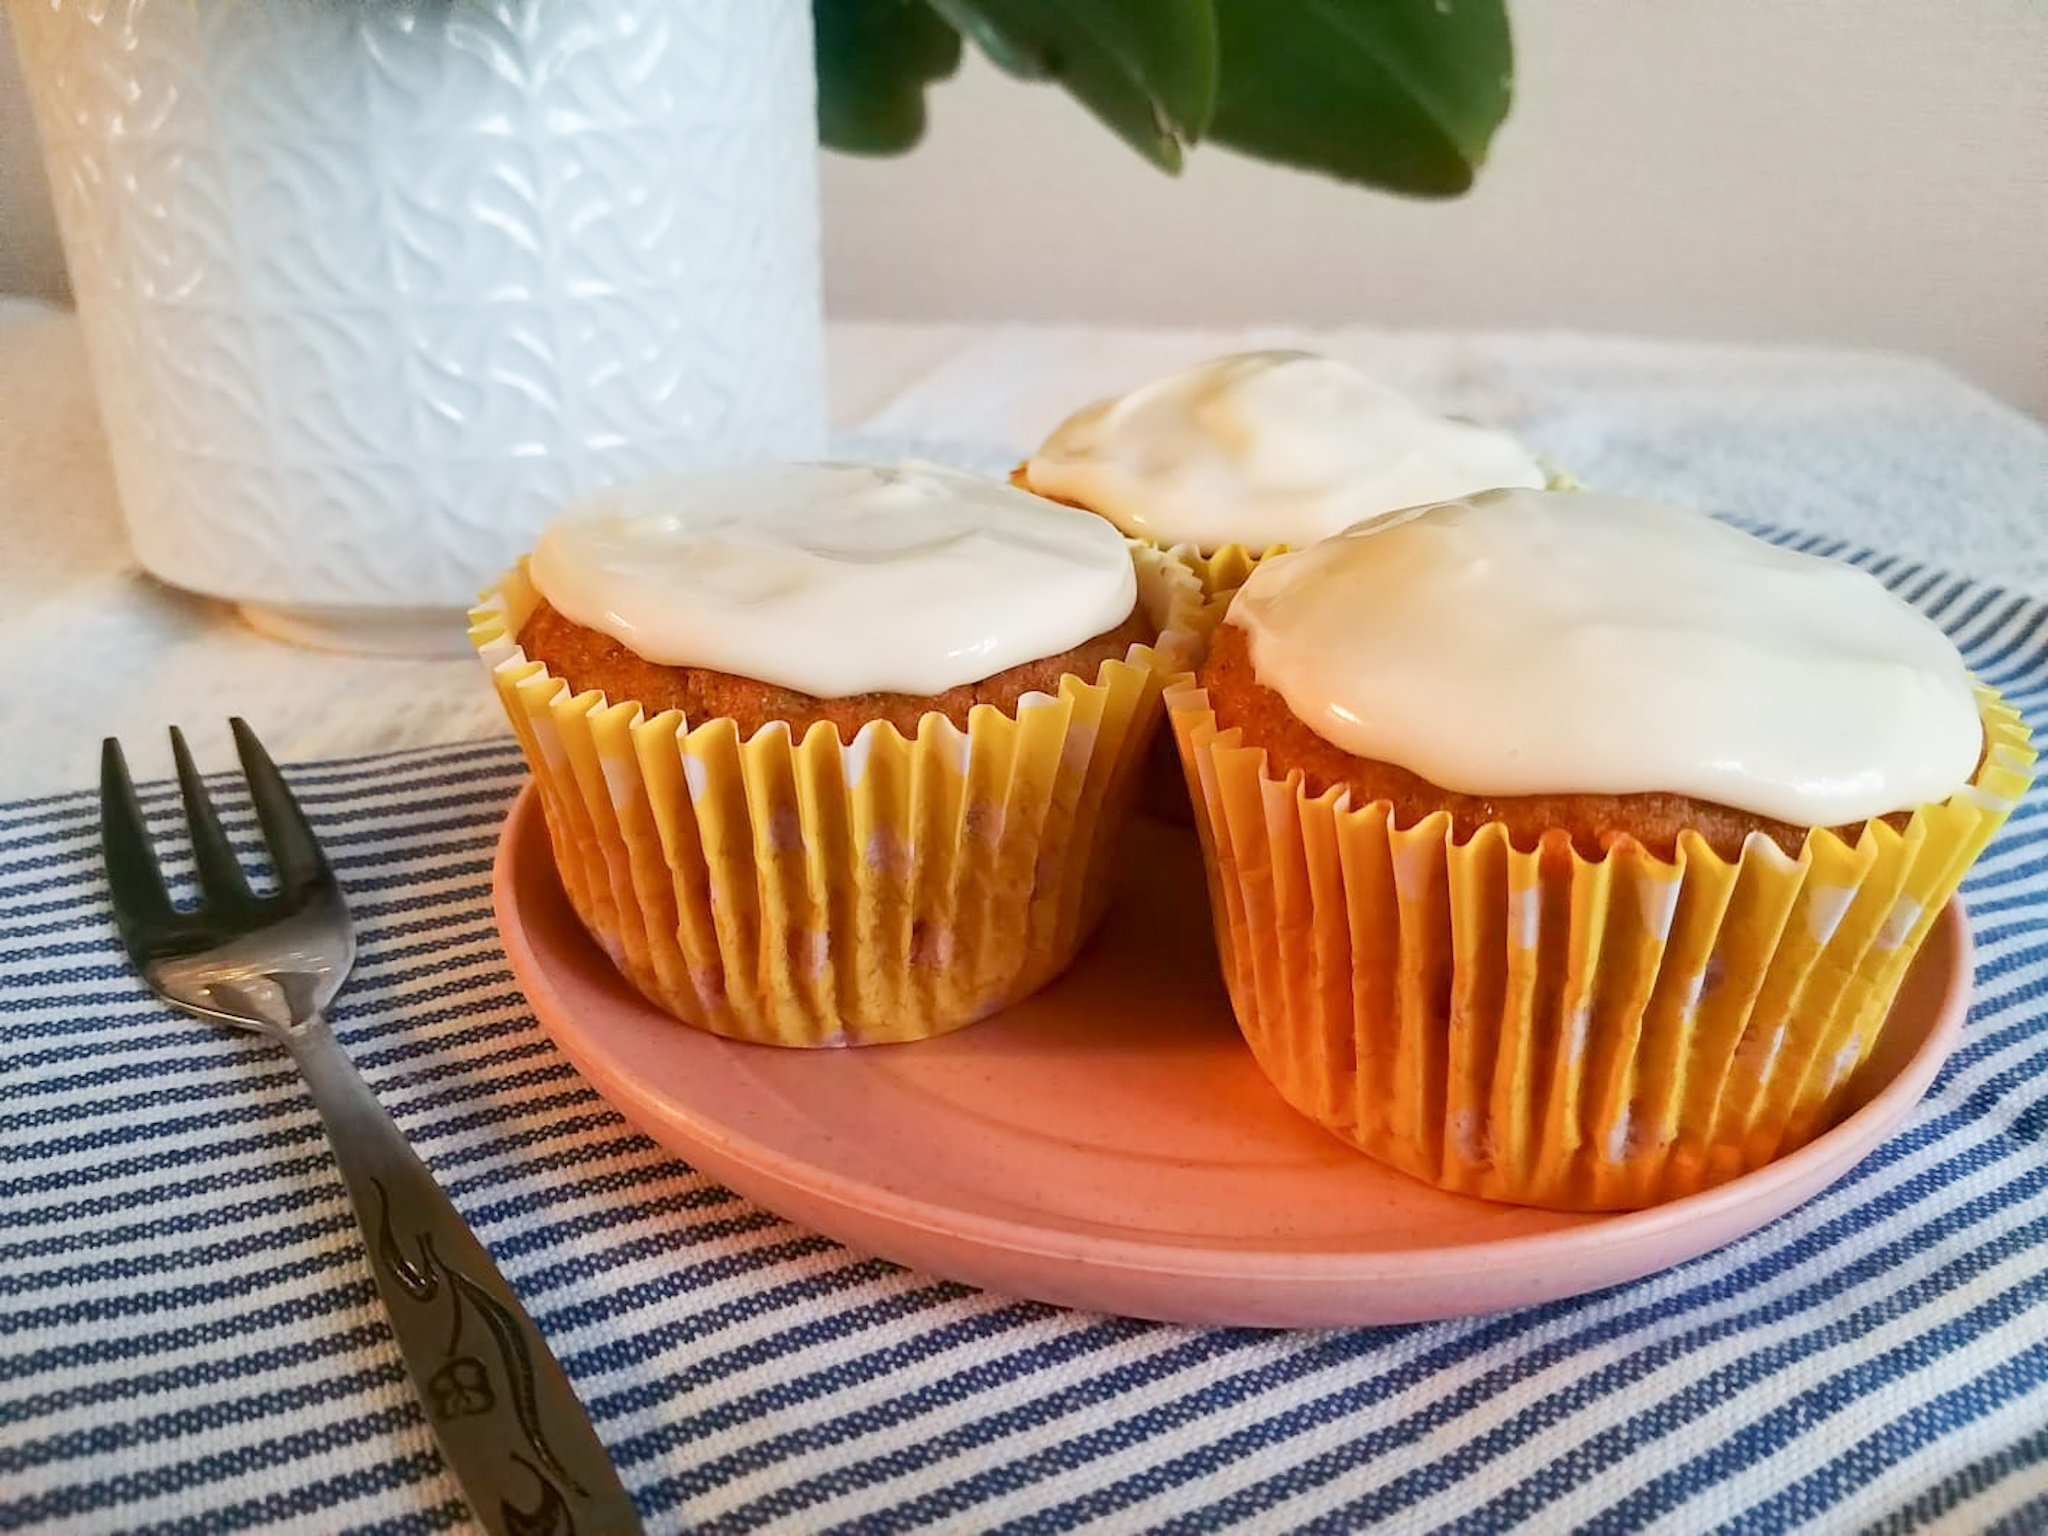 gluten free carrot cake muffins with walnuts, sultanas or raisins and cinnamon - topped with a simple vanilla icing